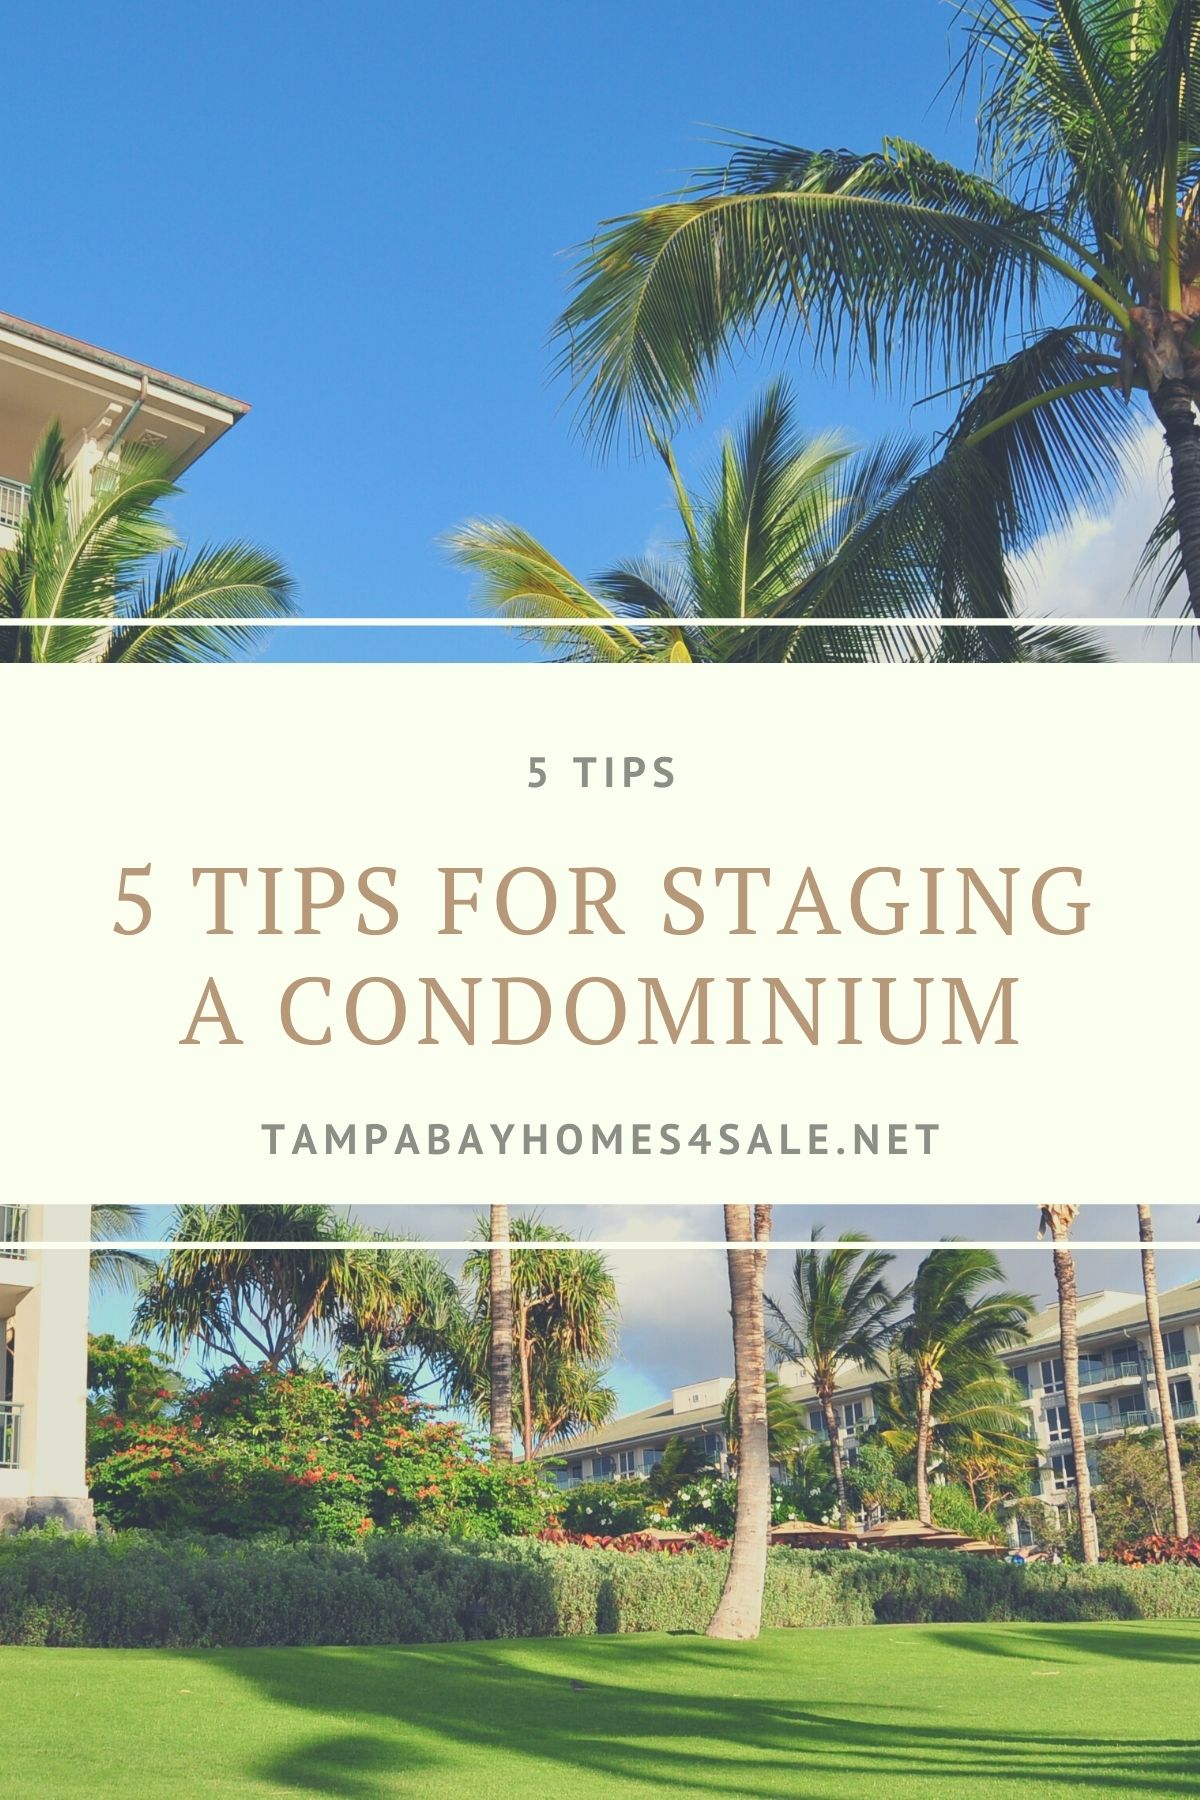 5 Tips for Staging a Condominium